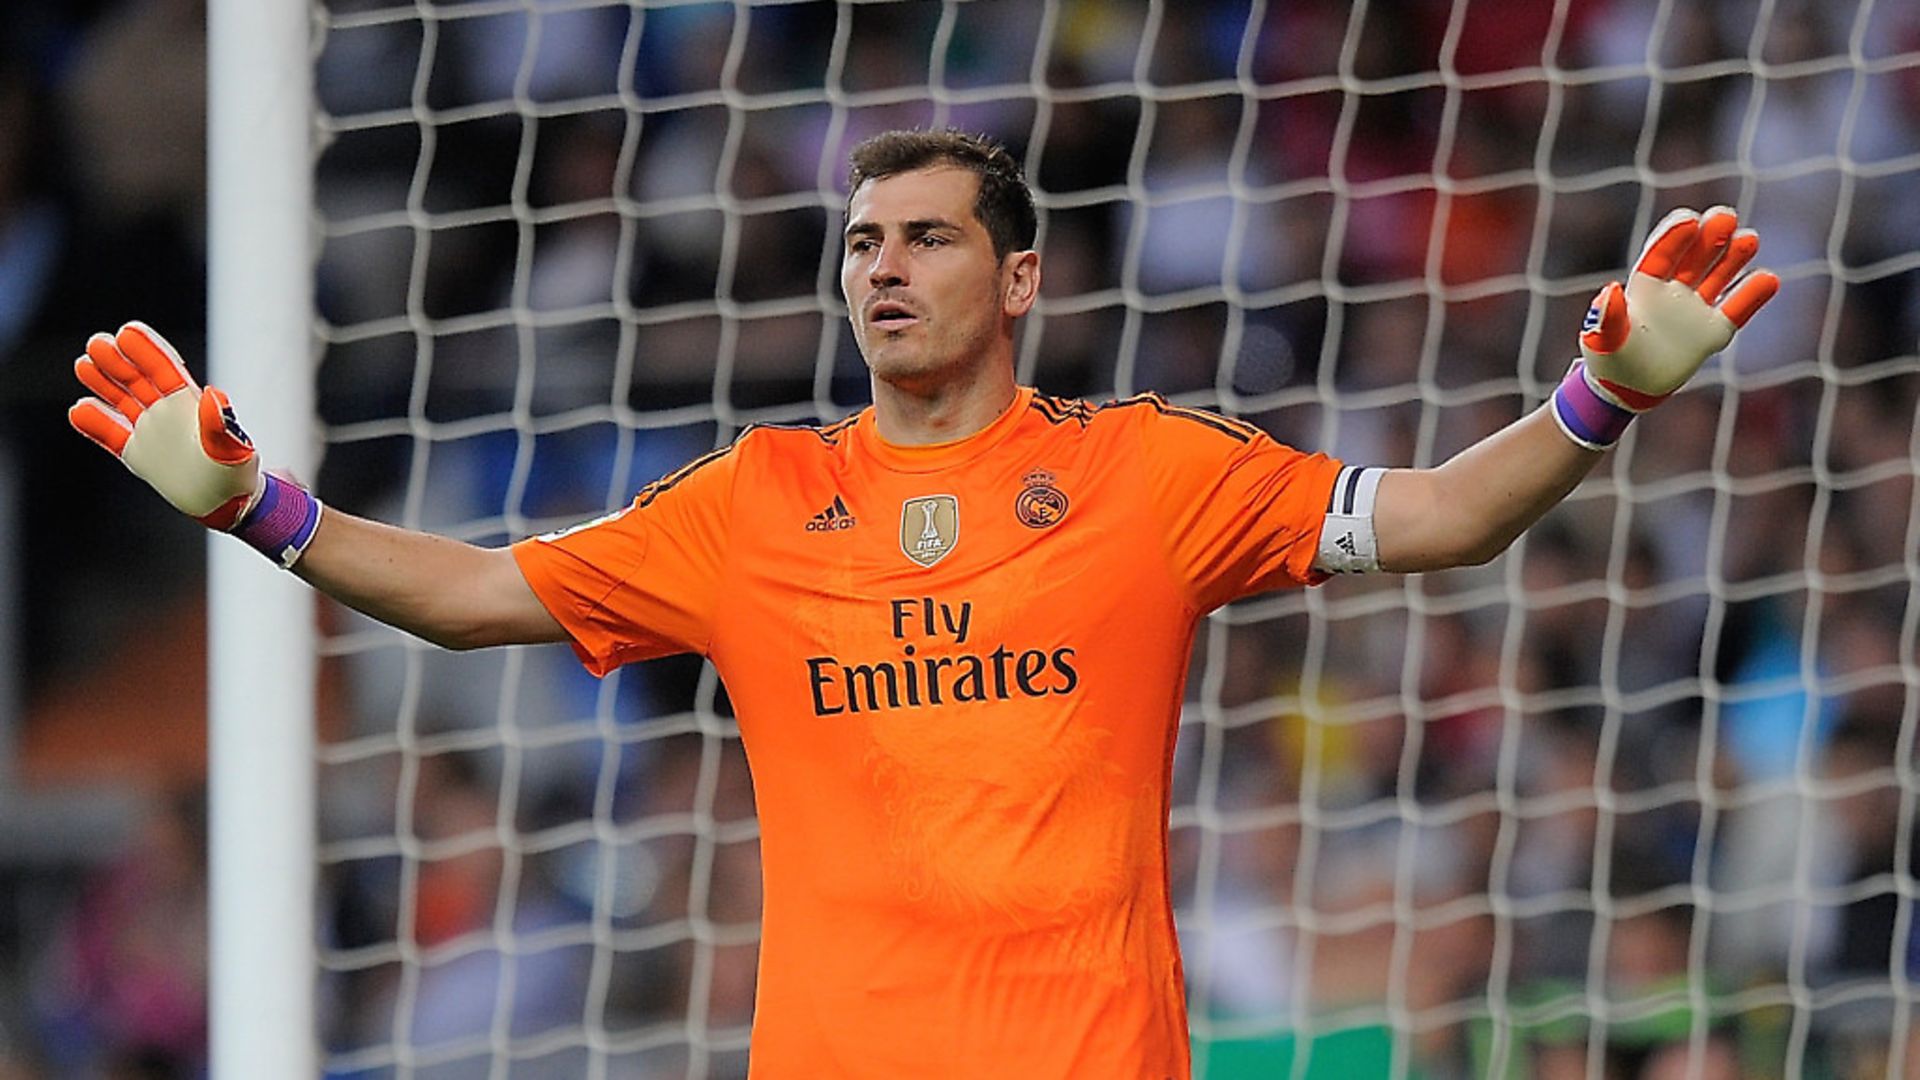 Former Real Madrid goalkeeper Iker Casillas (question nine) (Photo by Denis Doyle/Getty Images) - Credit: Getty Images